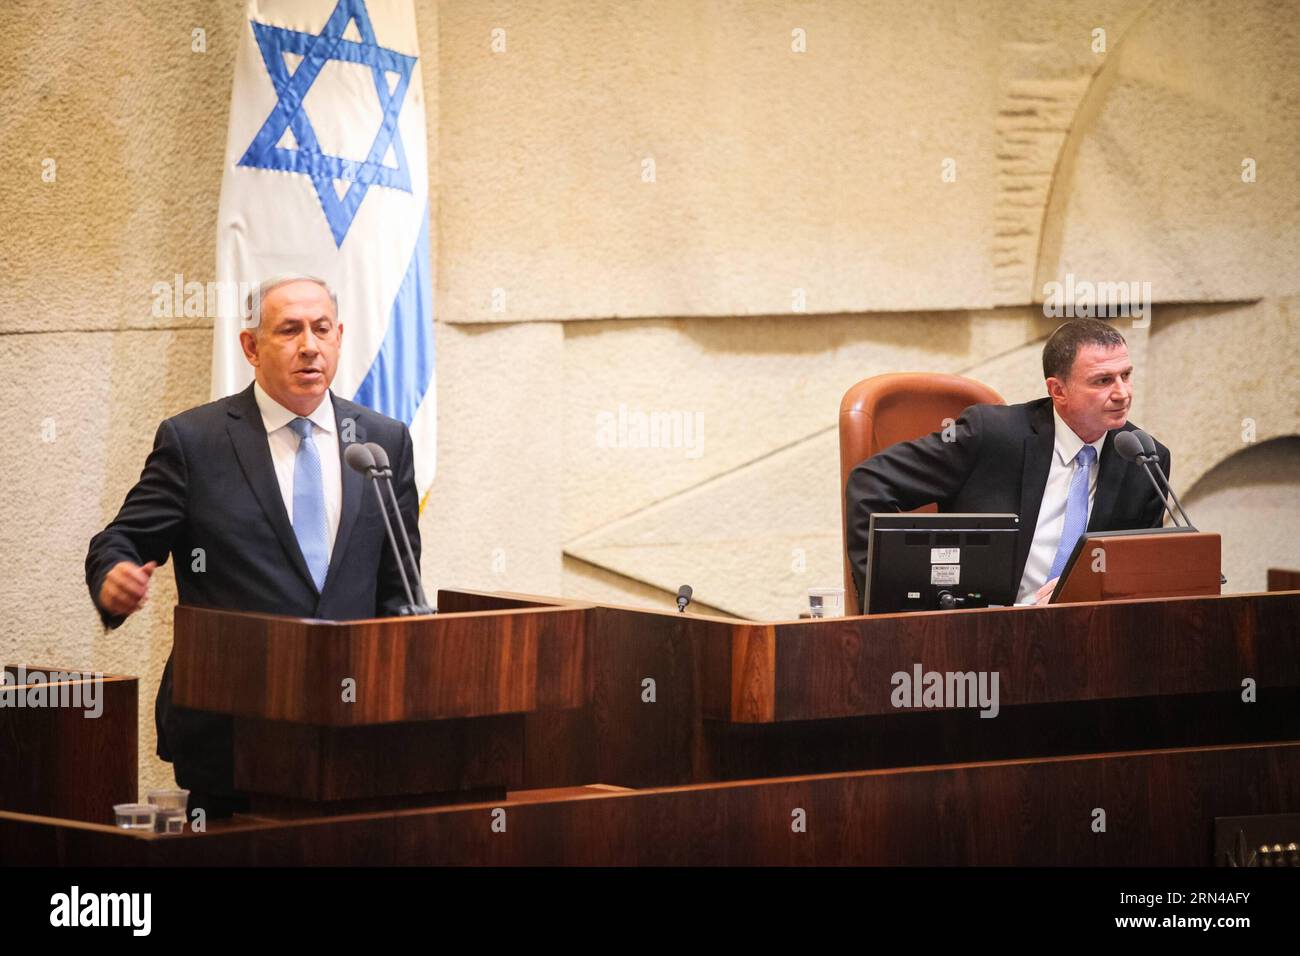 (150514) -- JERUSALEM, May 14, 2015 -- Israeli Prime Minister Benjamin Netanyahu (L) makes a speech before presenting the newly formed government in the Israeli Knesset (parliament) in Jerusalem, on May 14, 2015. The Israeli parliament approved late Thursday night a right-wing government formed by incumbent Prime Minister Benjamin Netanyahu after his Likud party won an early election nearly two months ago. The 20-member cabinet, whose lineup was finalized not long before the vote, is to be sworn in soon after it won the parliament s confirmation in a vote of 61 to 59. ) MIDEAST-JERUSALEM-ISRAE Stock Photo